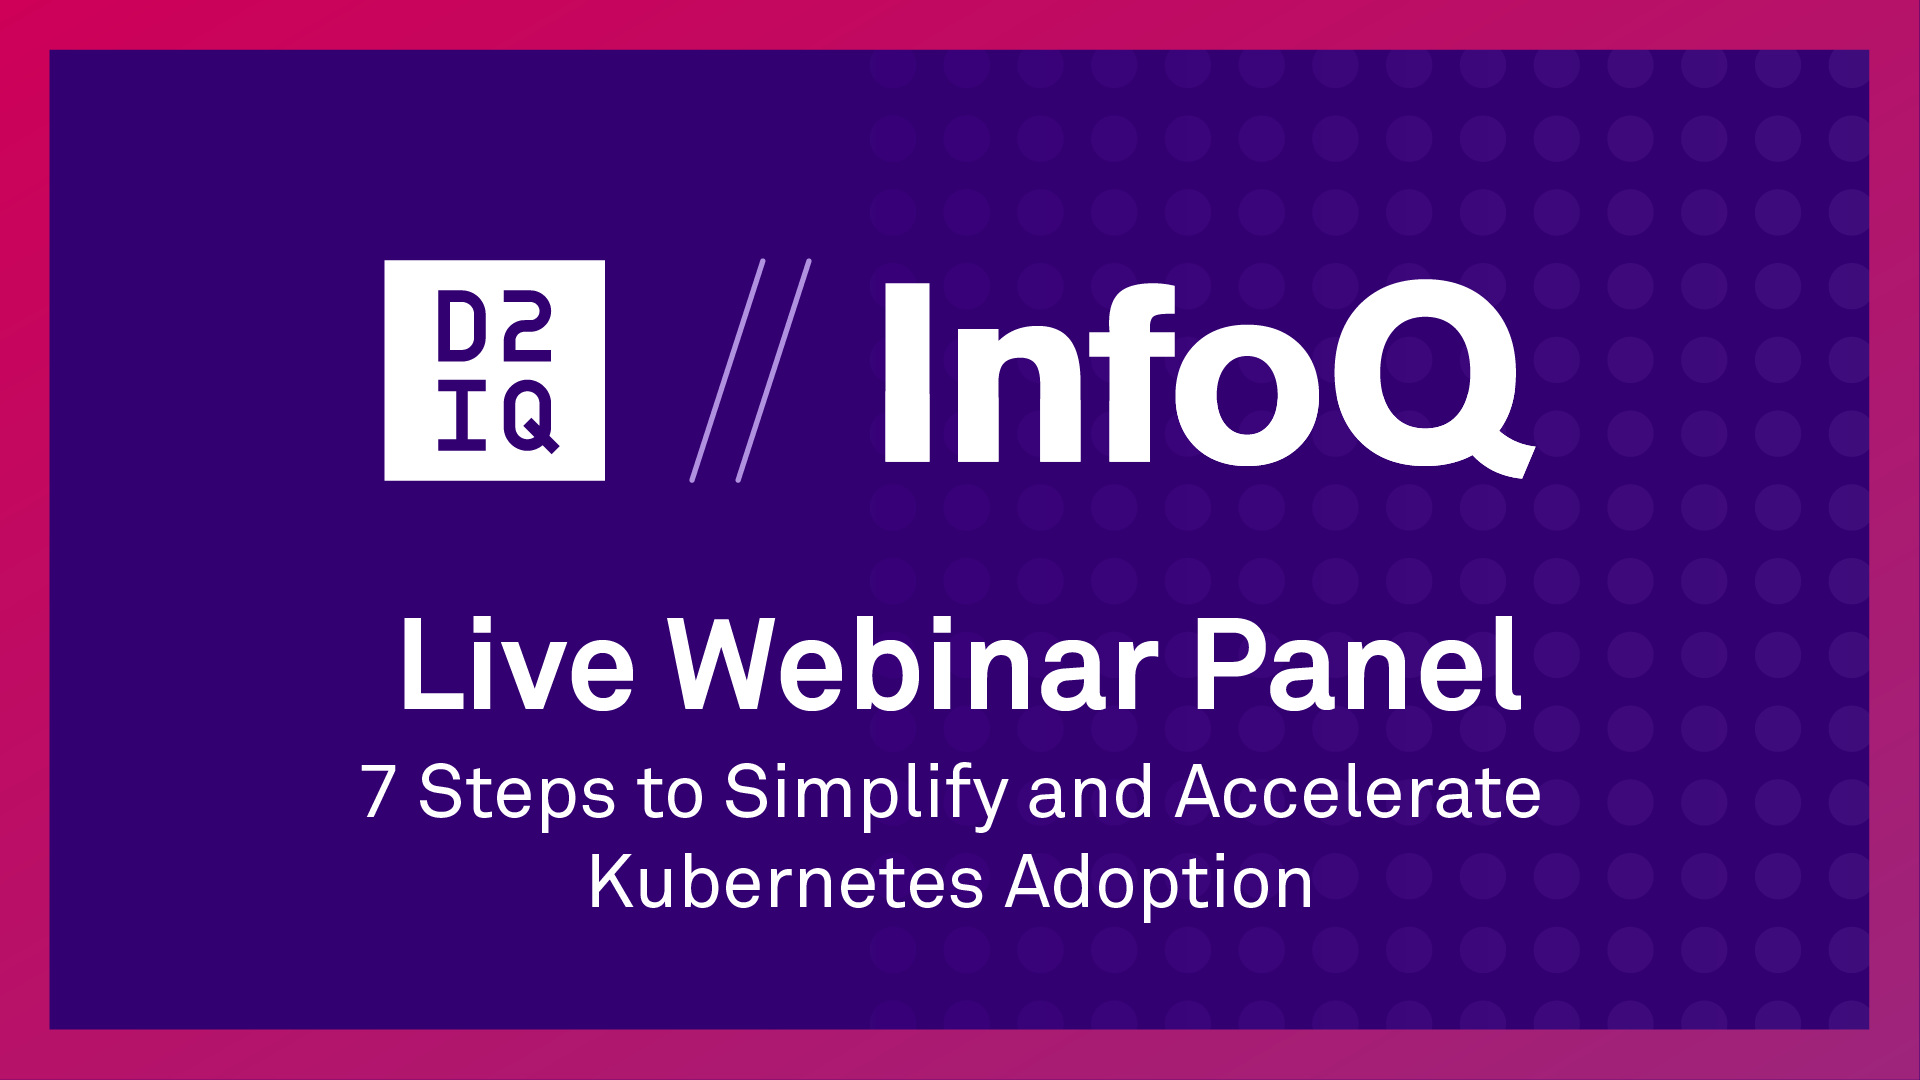 Live Webinar Panel: 7 Steps to Simplify and Accelerate Kubernetes Adoption